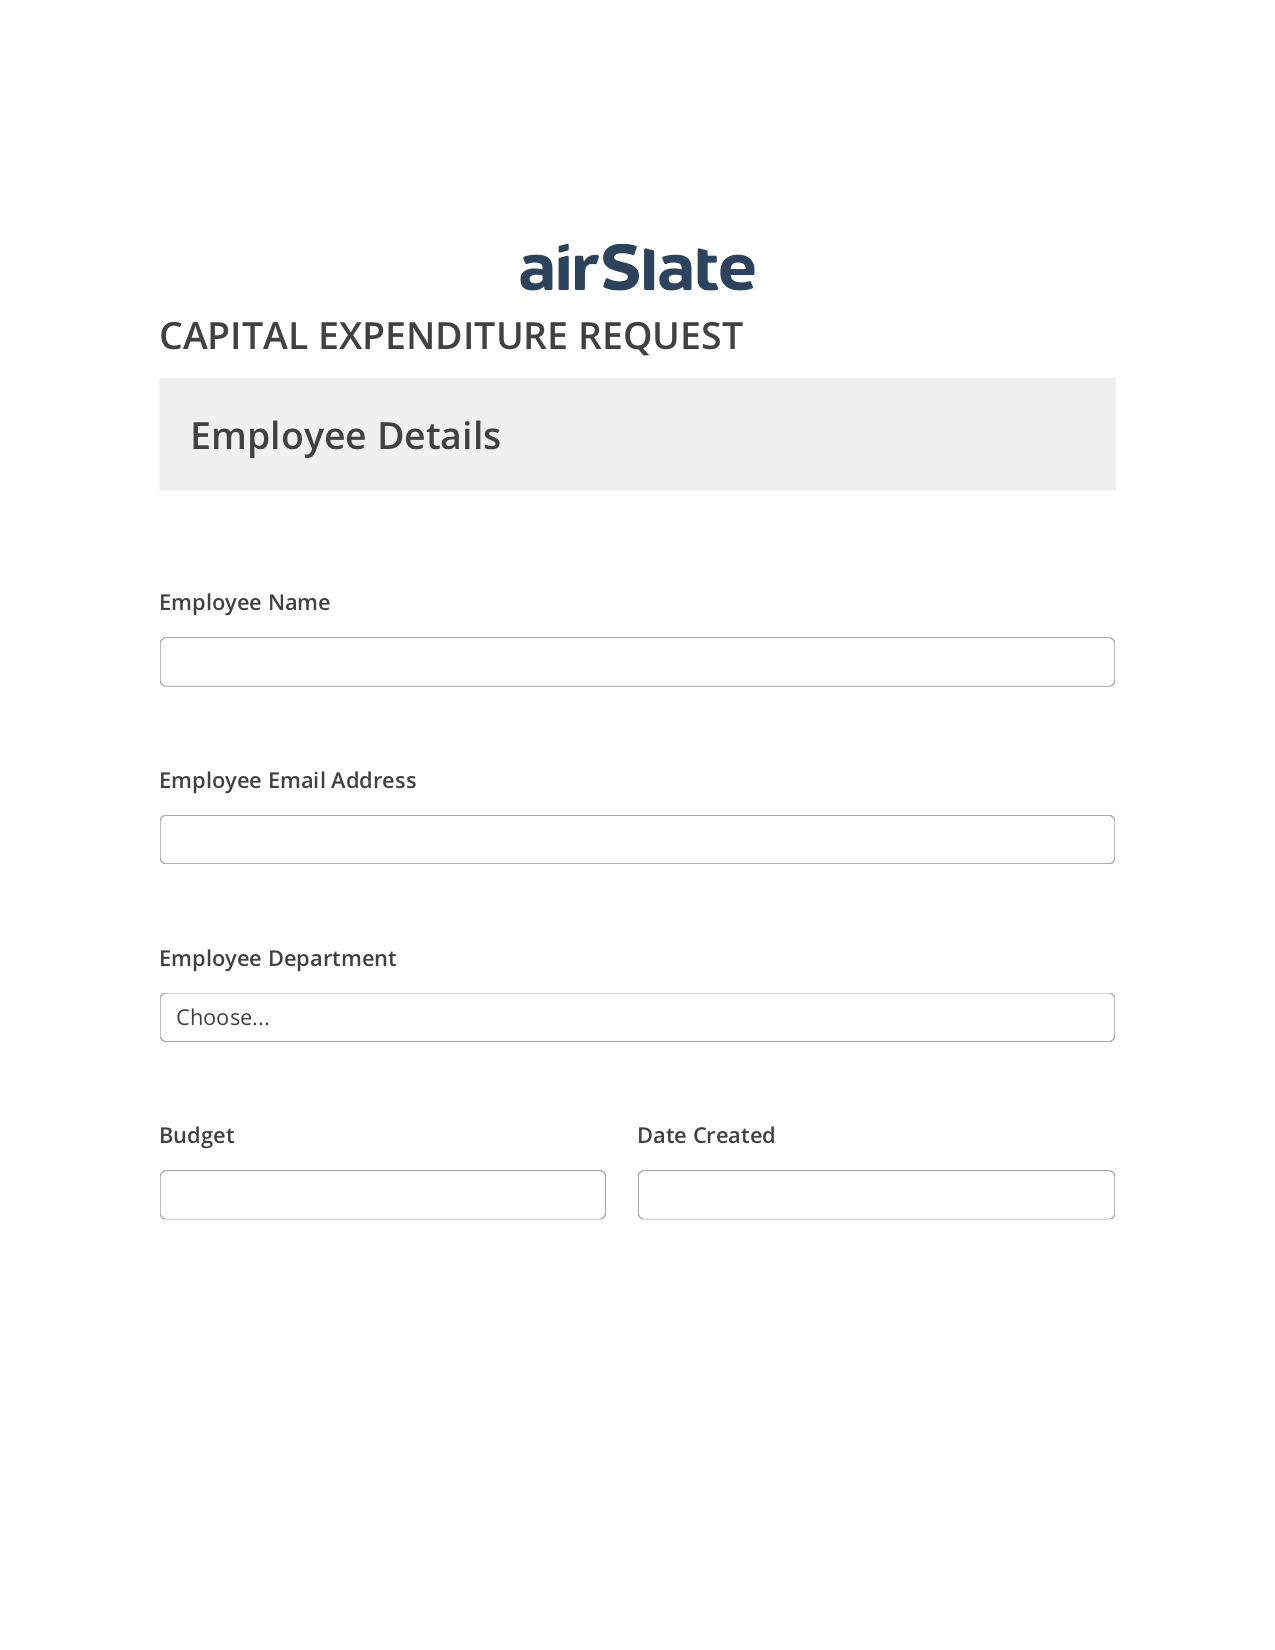 Capital Expenditure Request Approval Workflow Pre-fill Dropdown from Airtable, SendGrid send Campaign bot, Export to Salesforce Bot